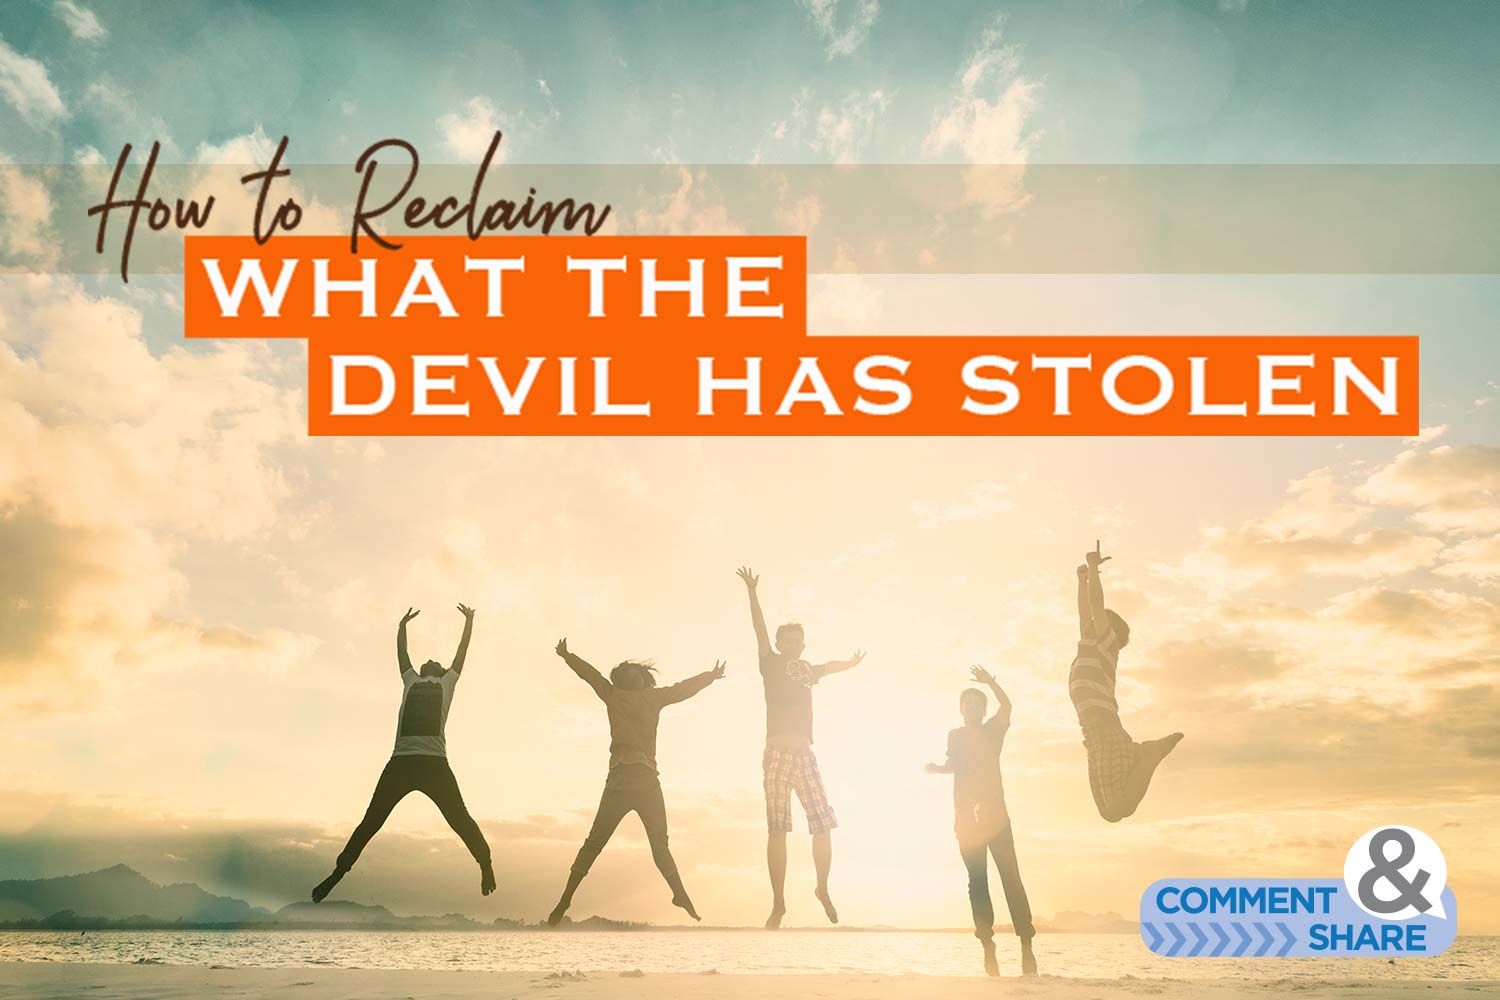 How to Reclaim What the Devil Has Stolen